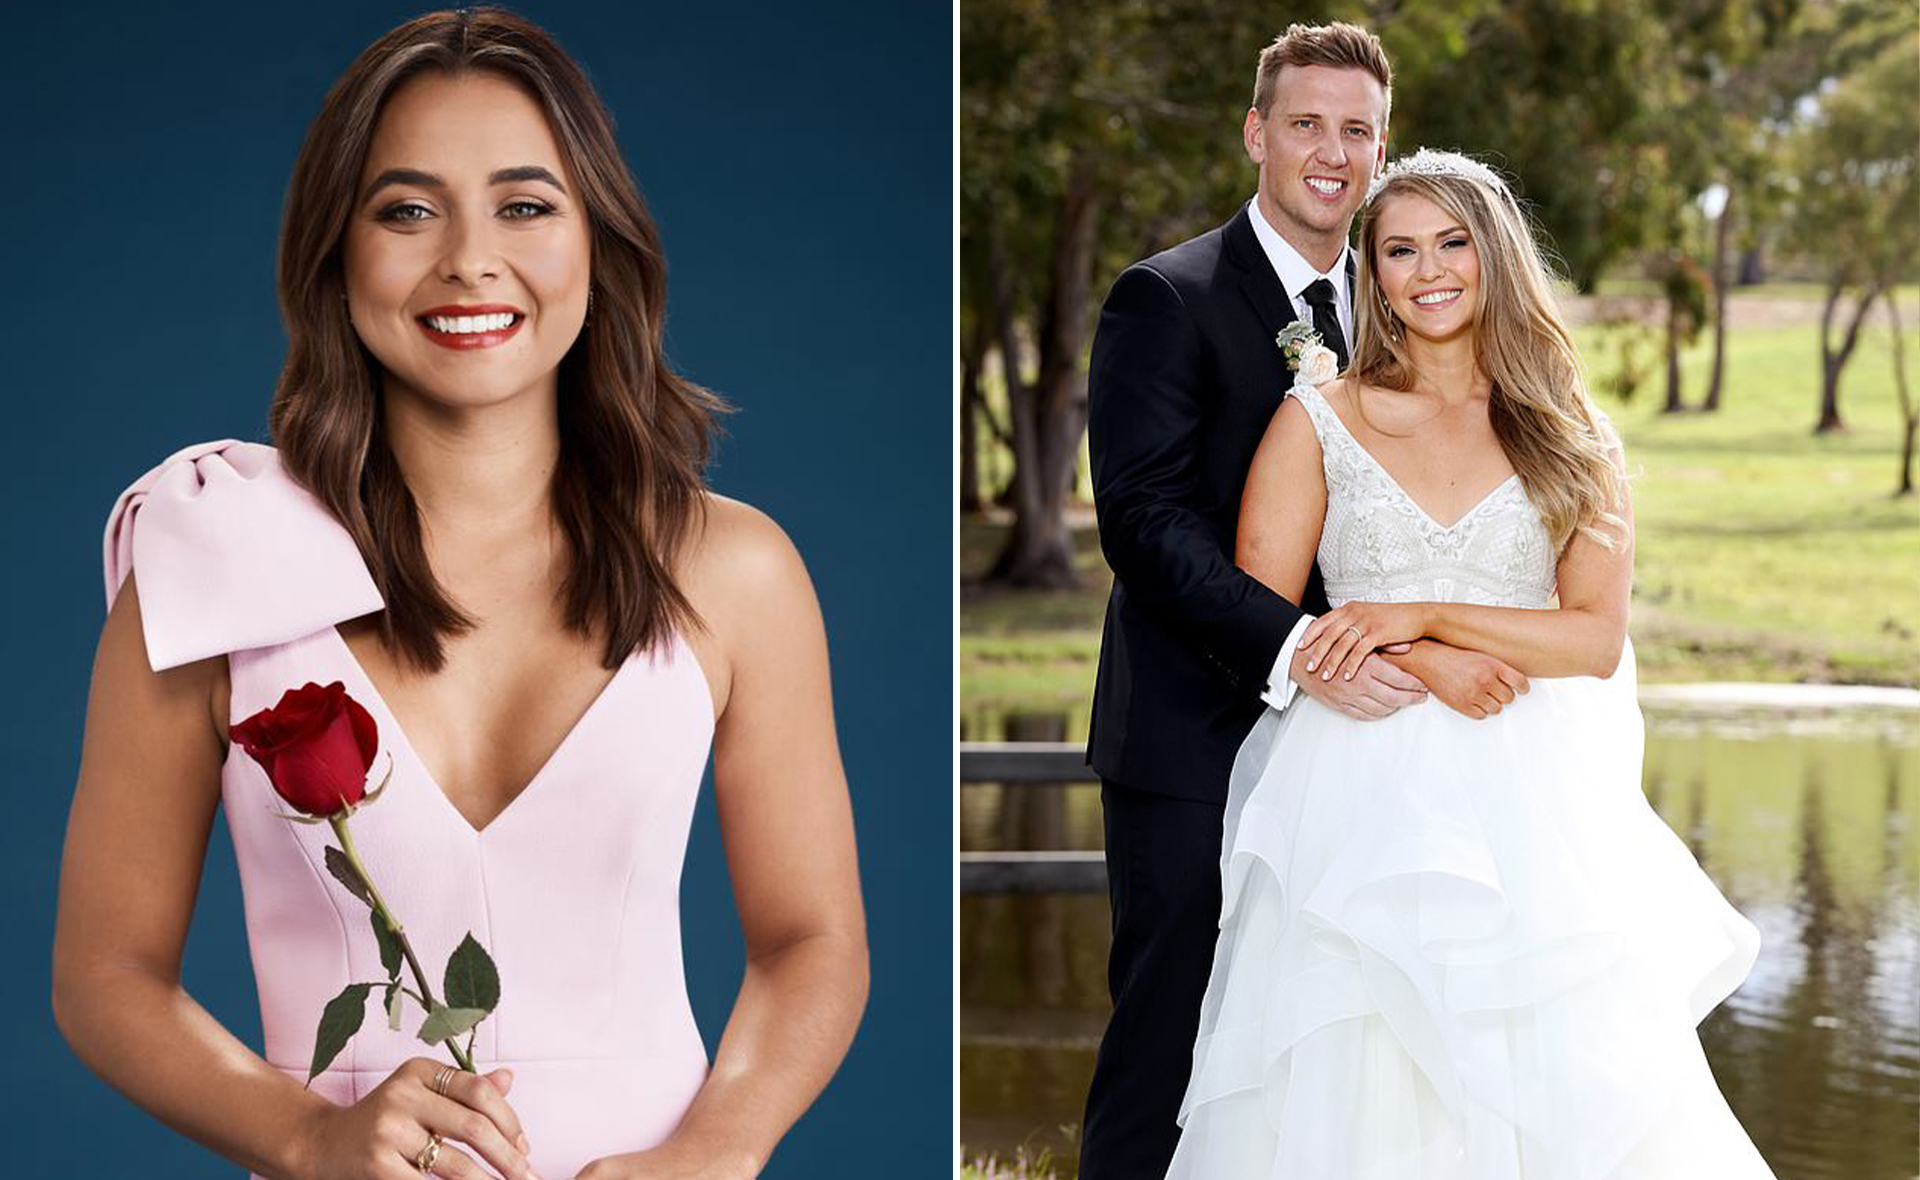 MAFS’ first openly bisexual groom Liam Cooper reveals why he’s fearful for Brooke Blurton ahead of The Bachelorette premiere